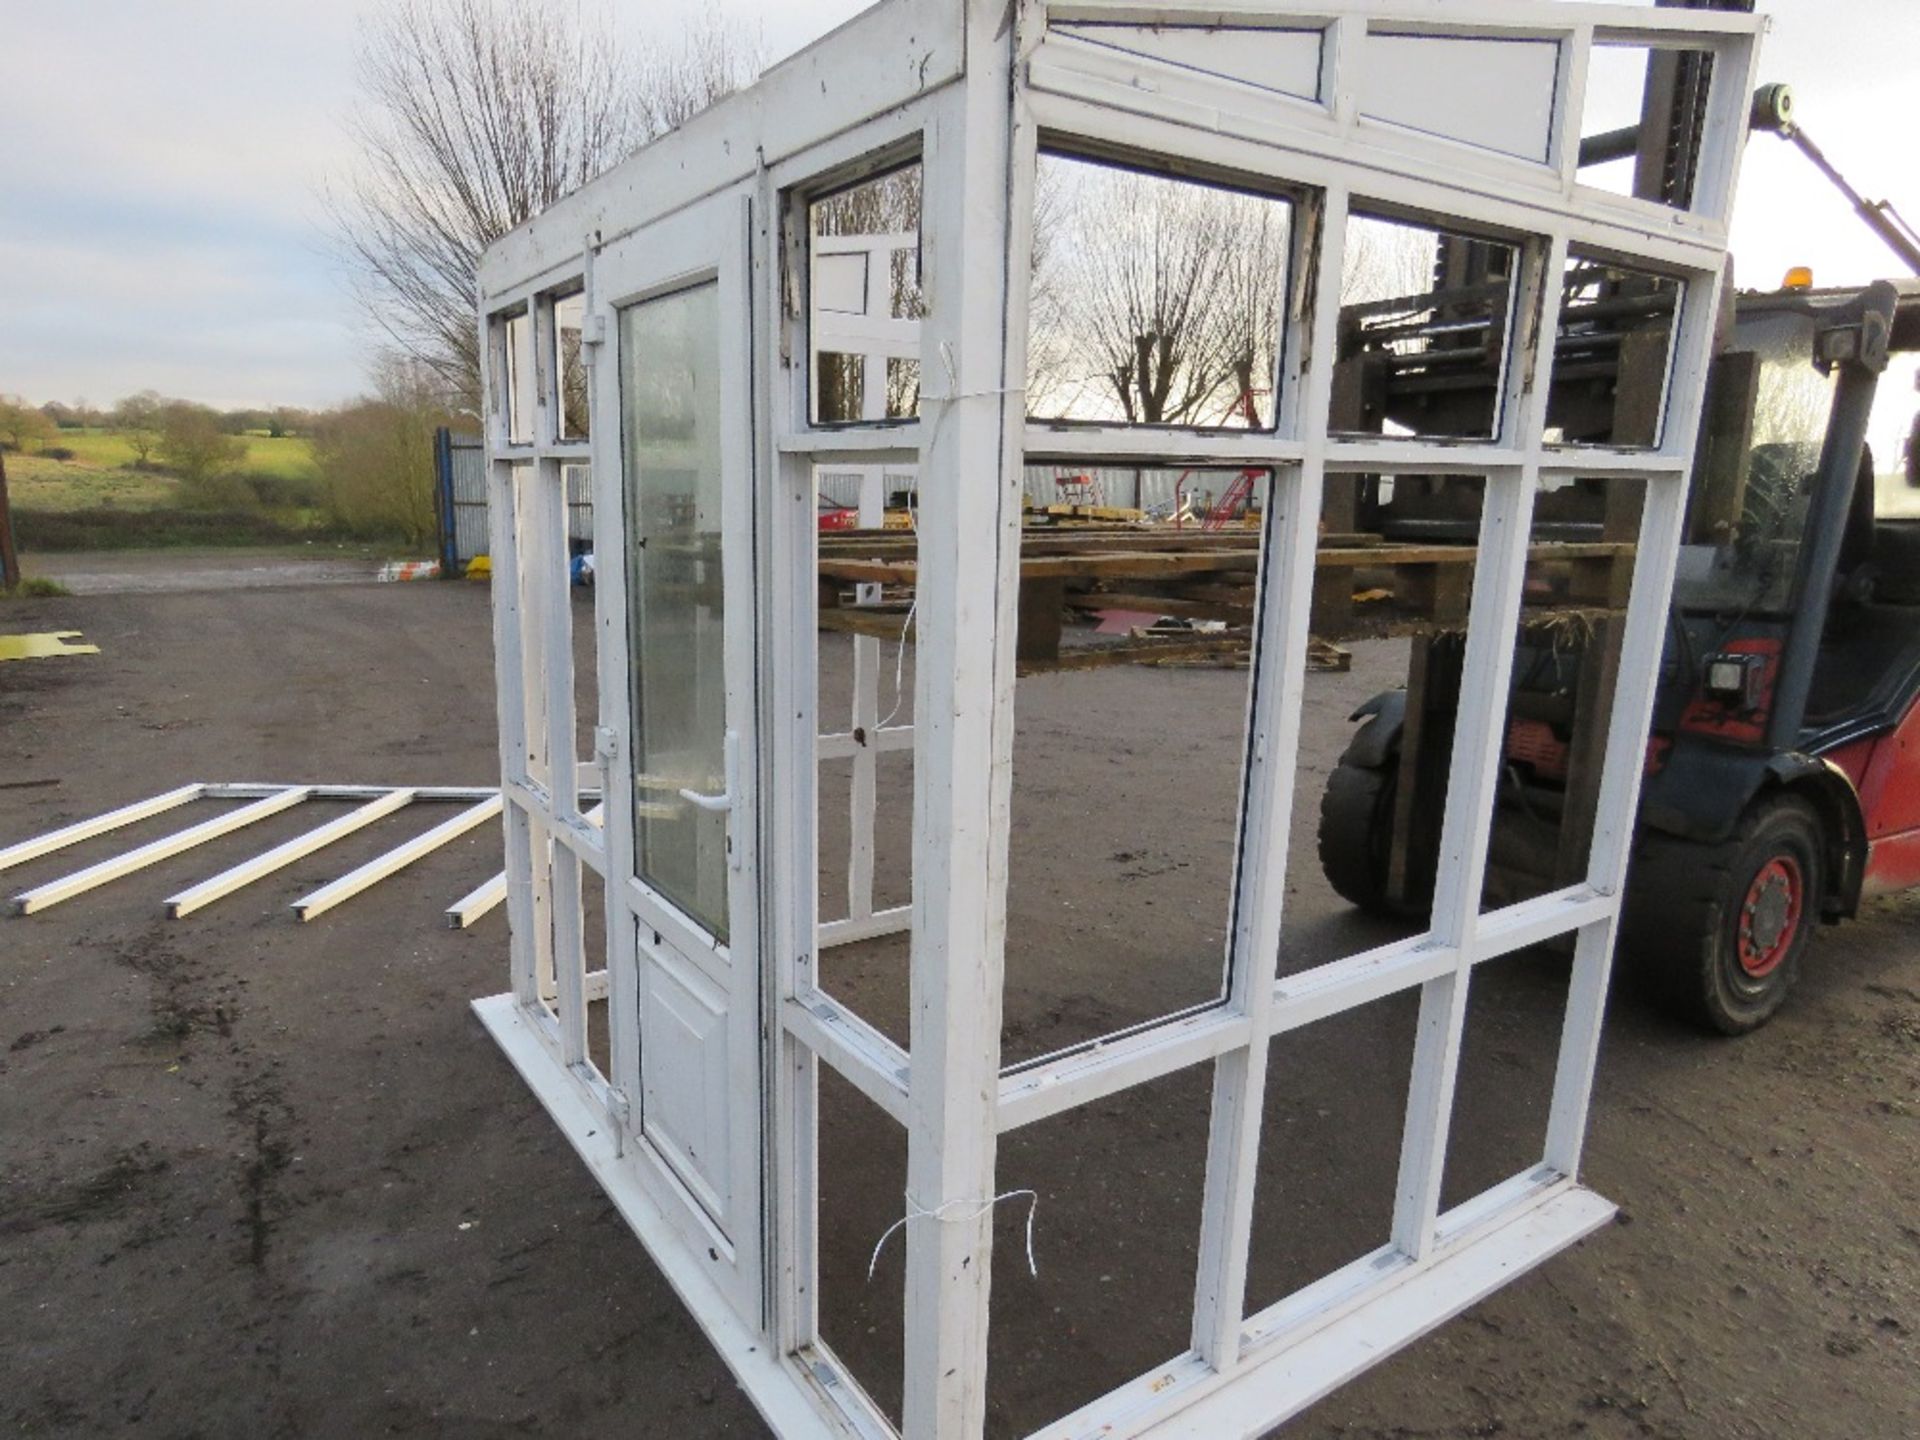 UPVC LEAN TO CONSERVATORY. 1.8M DEPTH X 2.4M WIDTH APPROX. HEIGHT 2.5M - 2.22M APPROX. WITH ONE DOOR